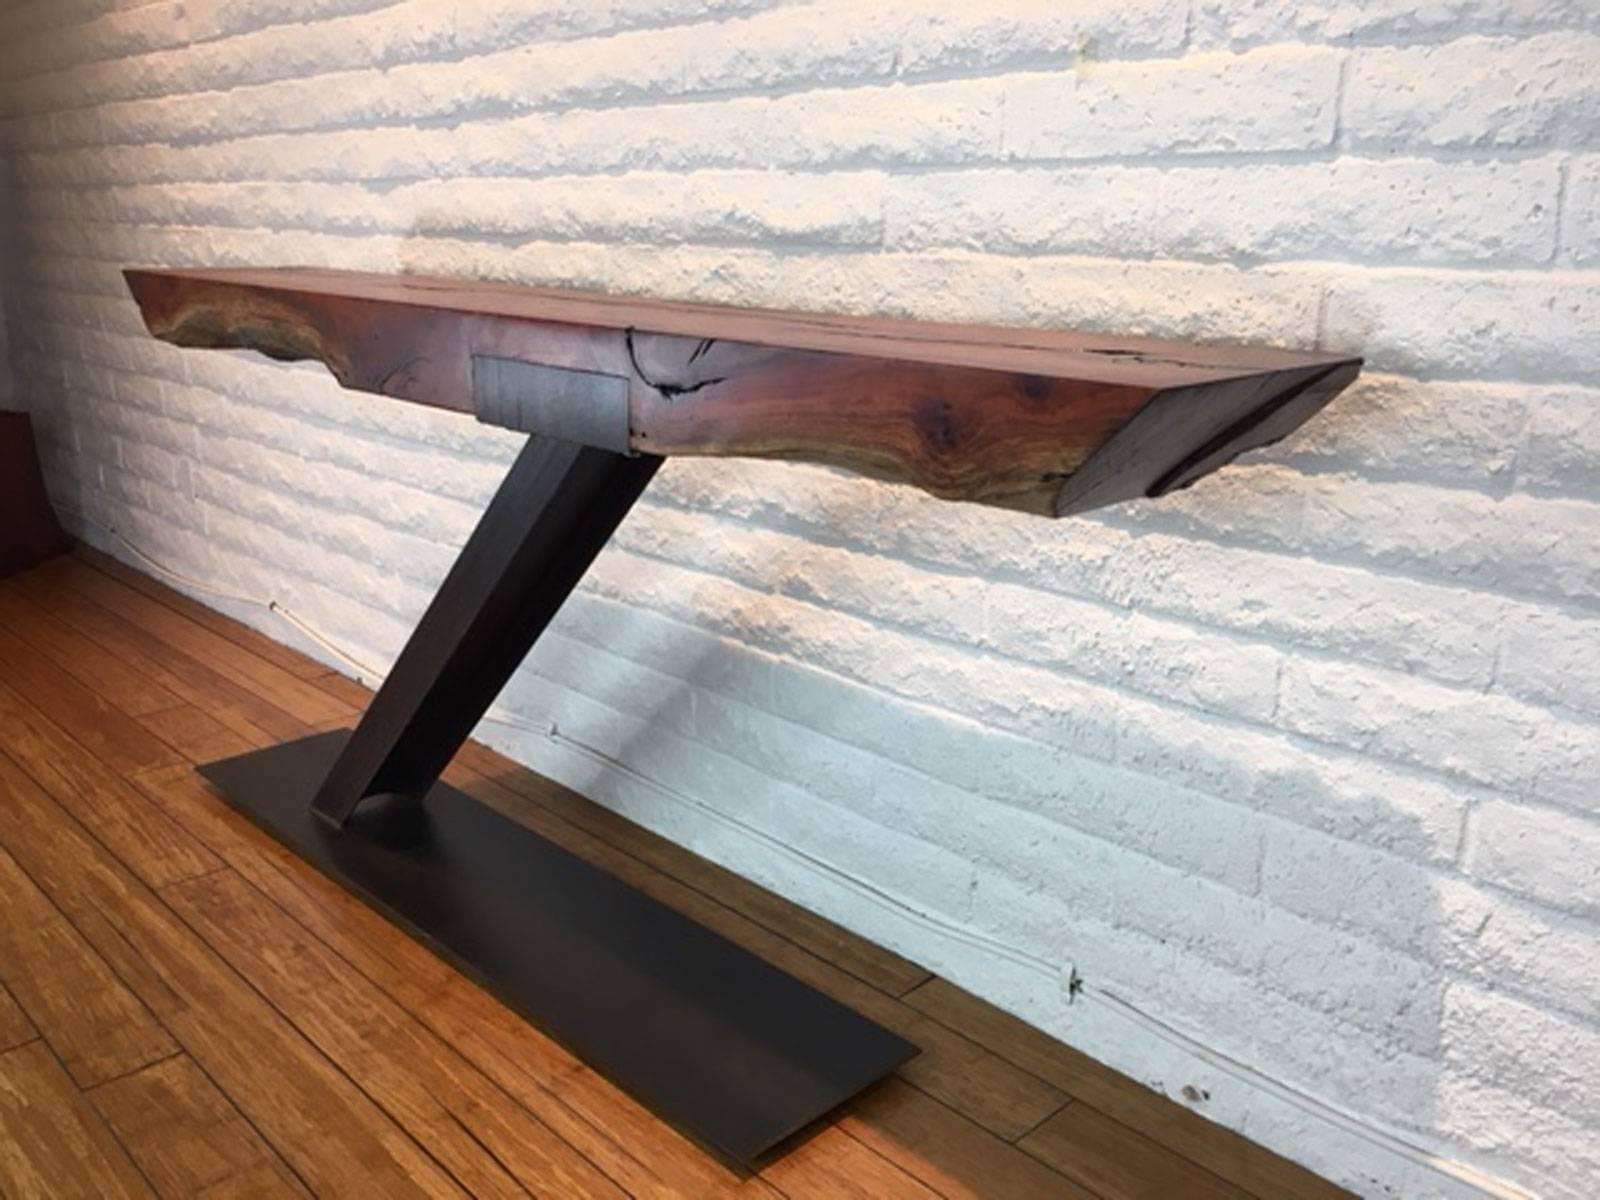 Eucalyptus iron and wood table console, sofa or hallway table designed and produced by master wood artist, designer, and maker Scott Mills who only uses reclaimed (deadfall or storm downed trees) in the pieces he produces. This piece is solid